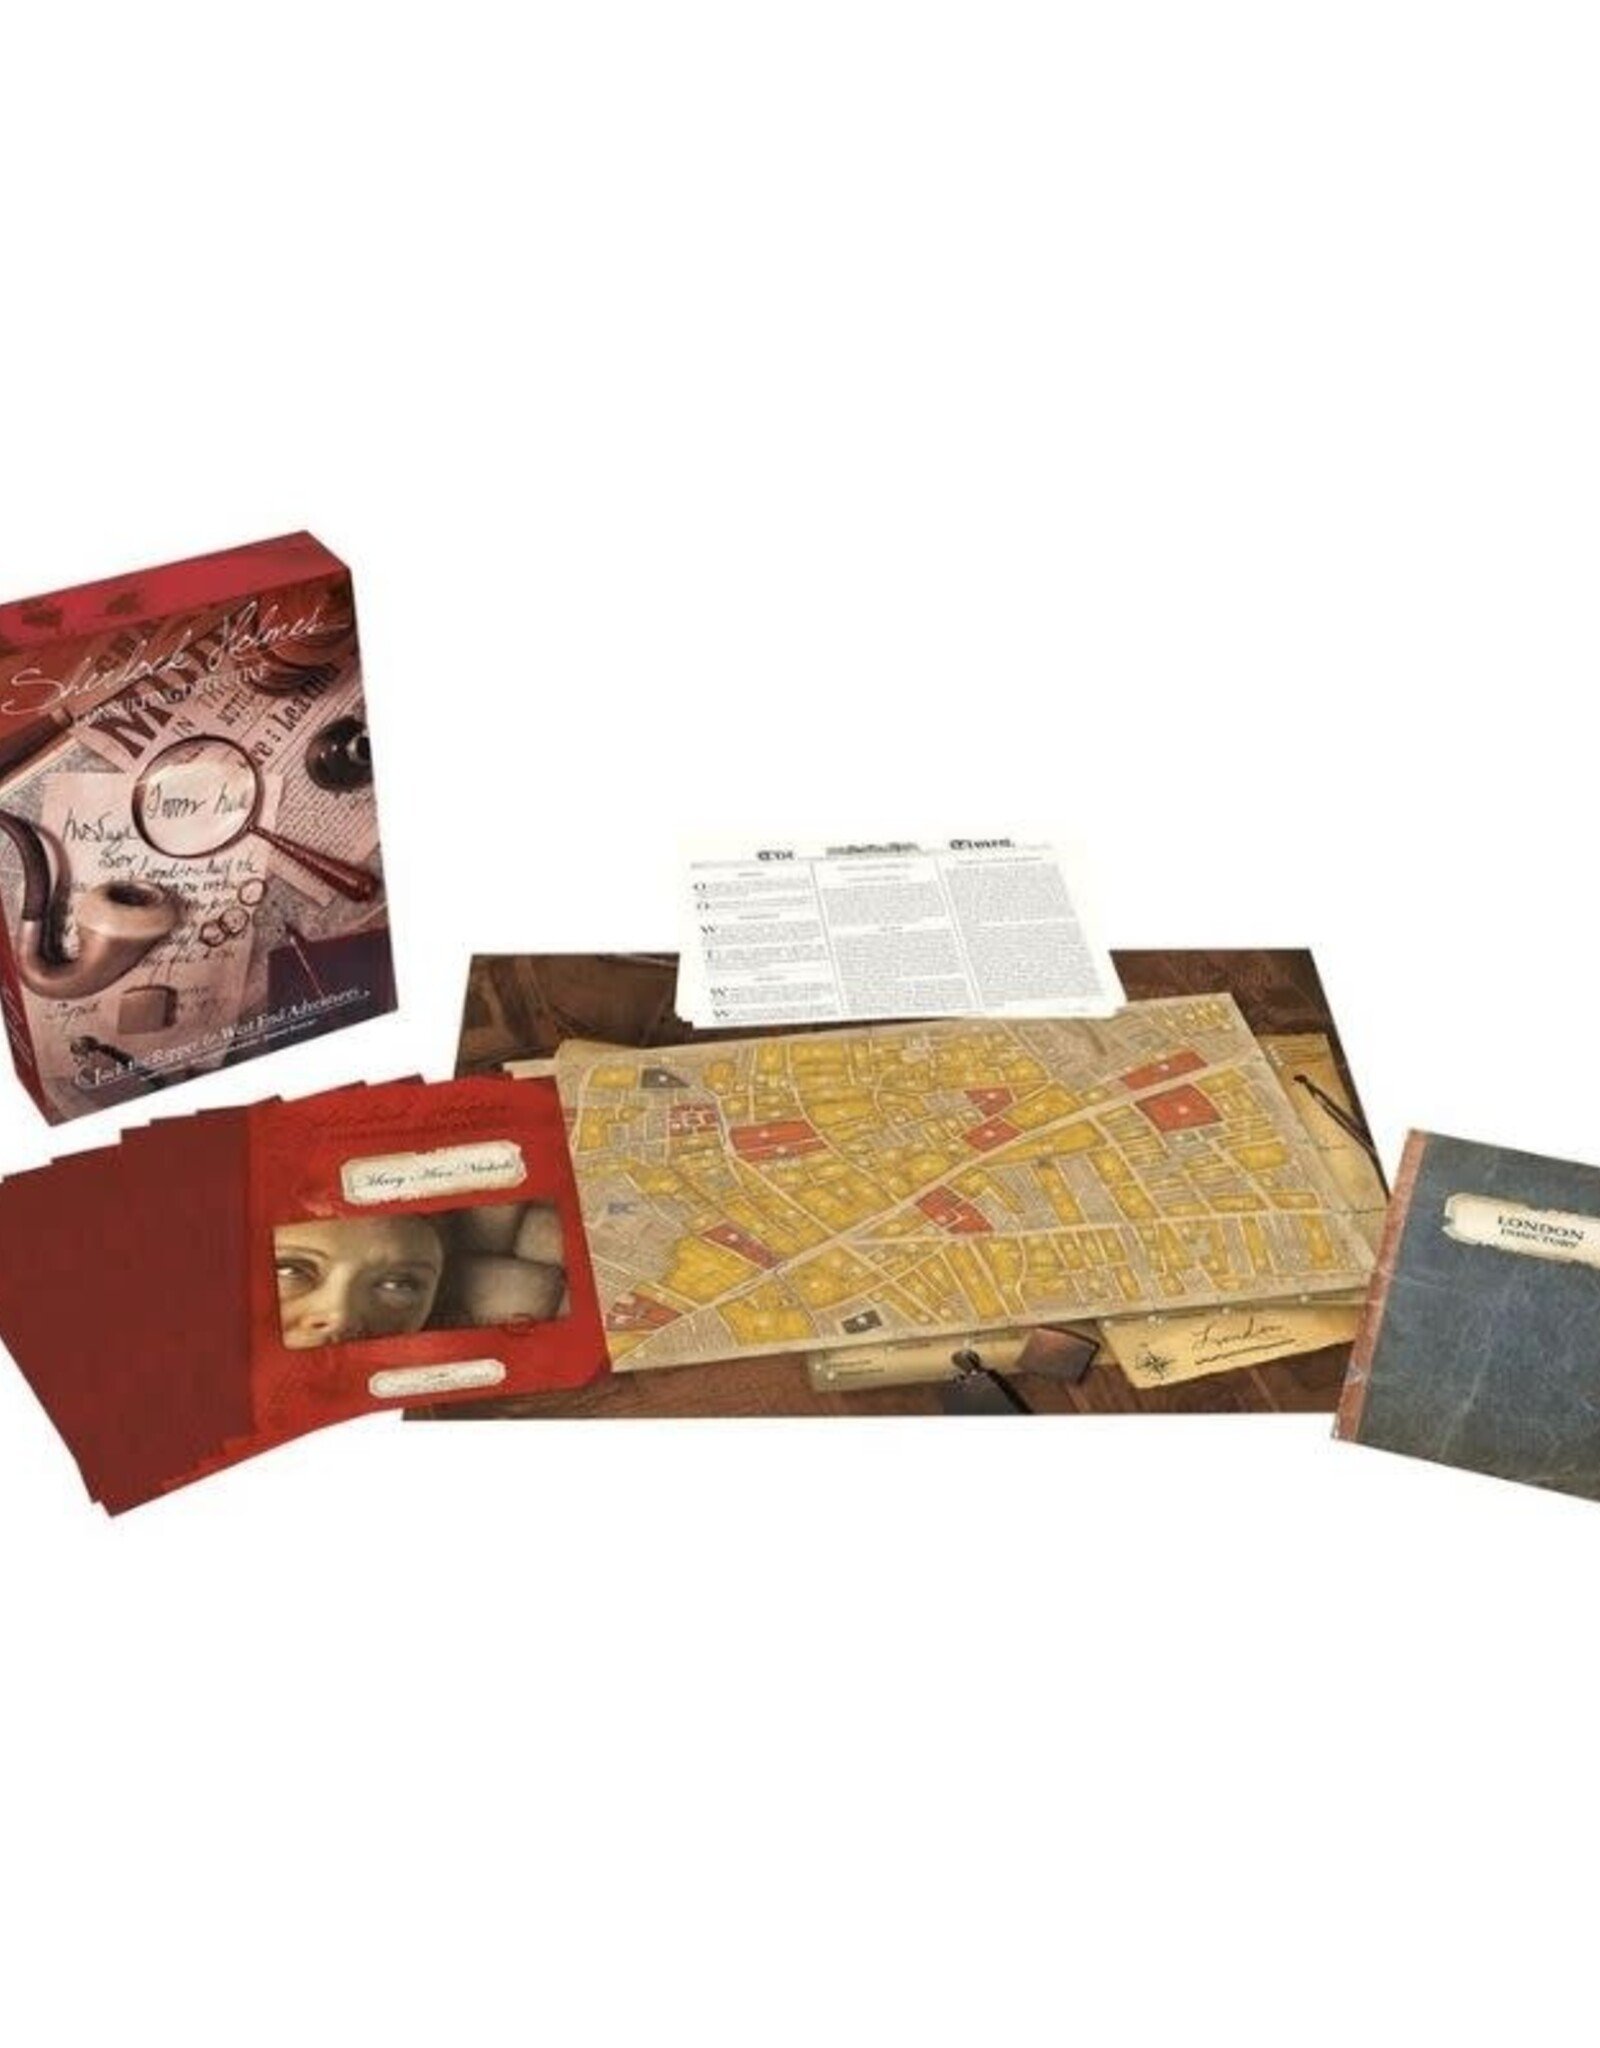 Sherlock Holmes: Consulting Detective - Jack the Ripper & West End Adventures